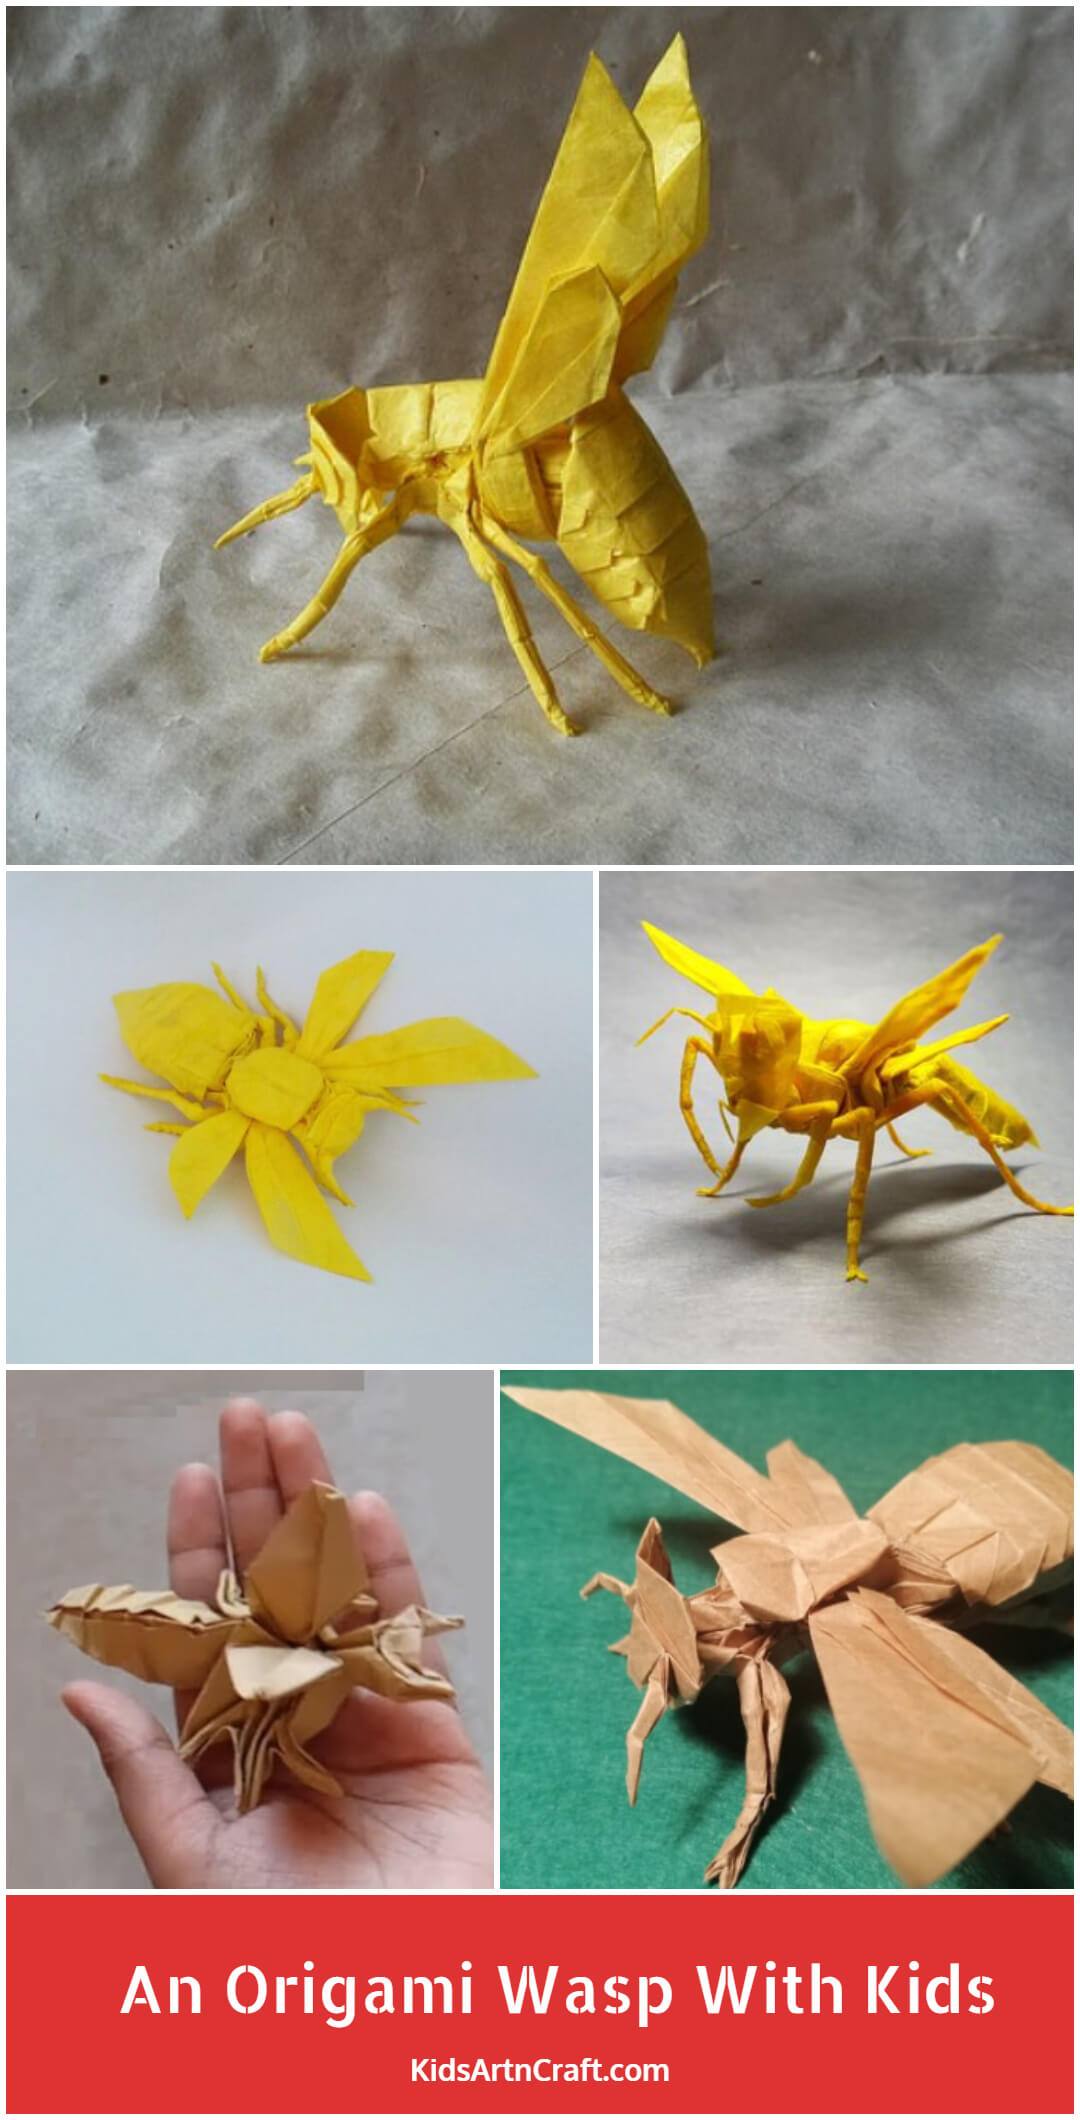 How To Make An Origami Wasp With Kids